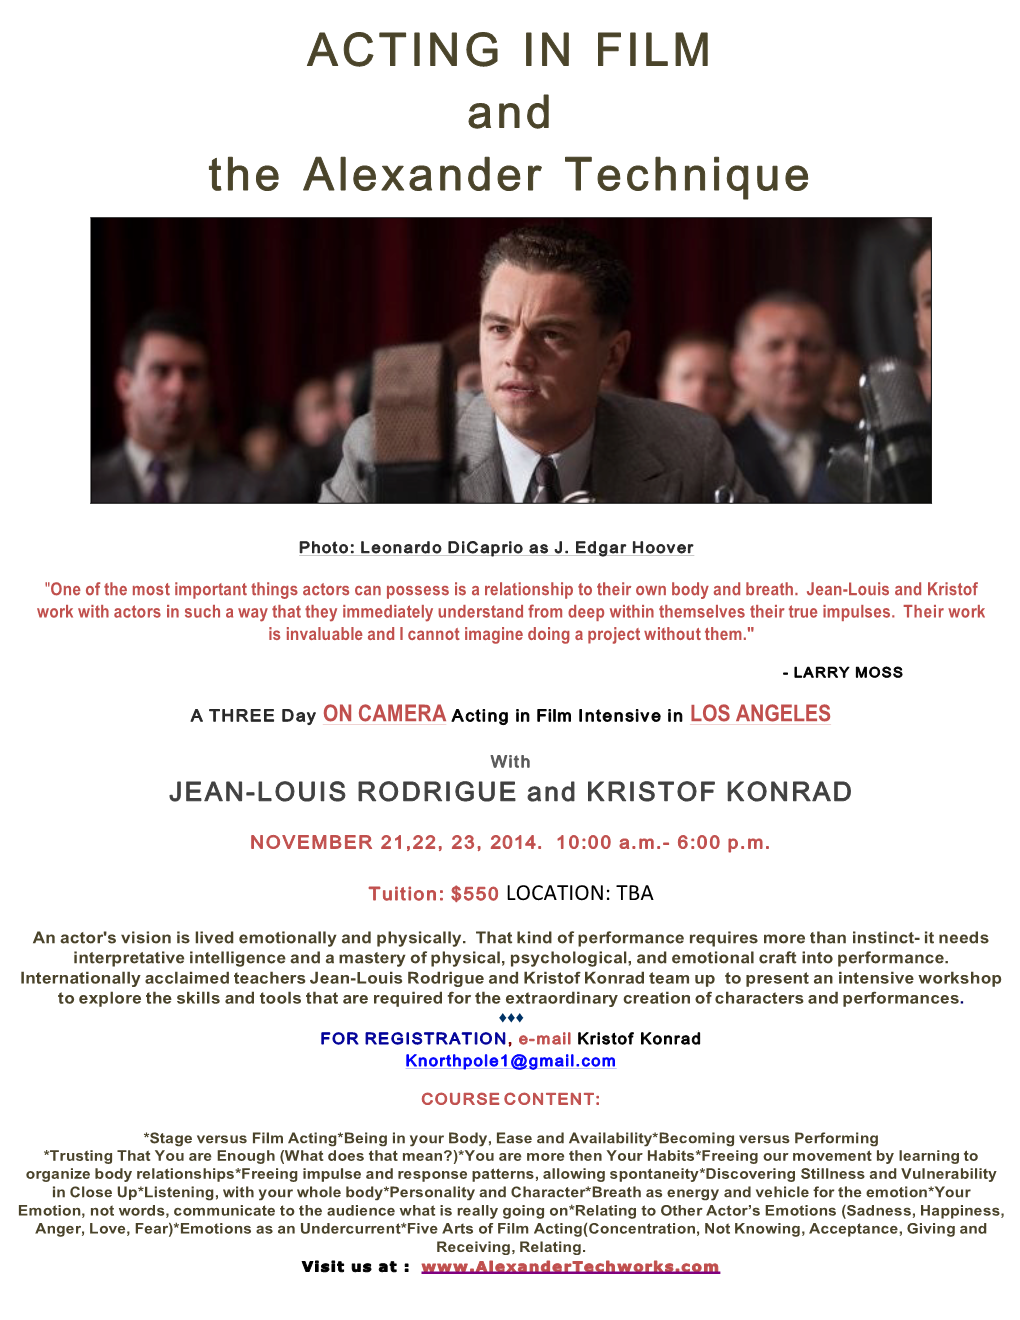 ACTING in FILM and the Alexander Technique